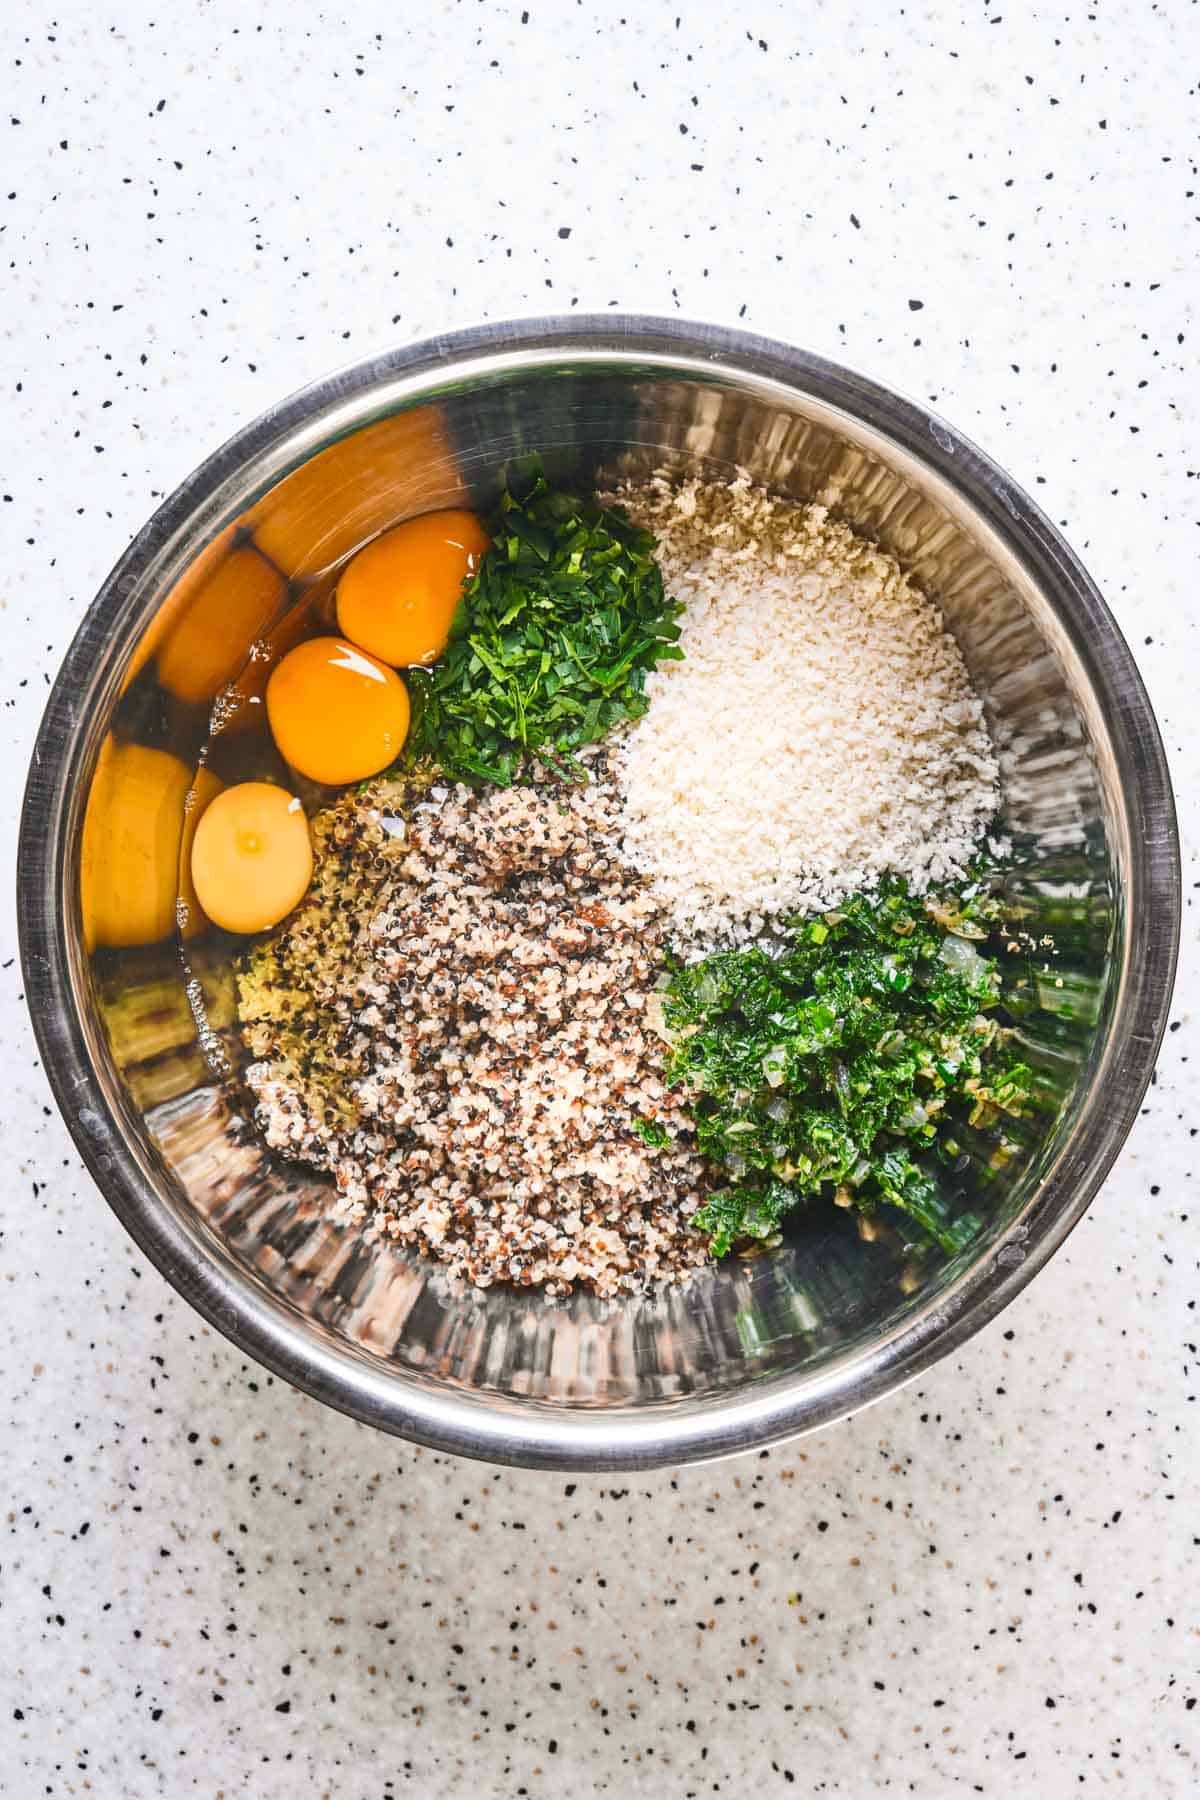 Eggs, kale and seasonings being added to a bowl of quinoa.